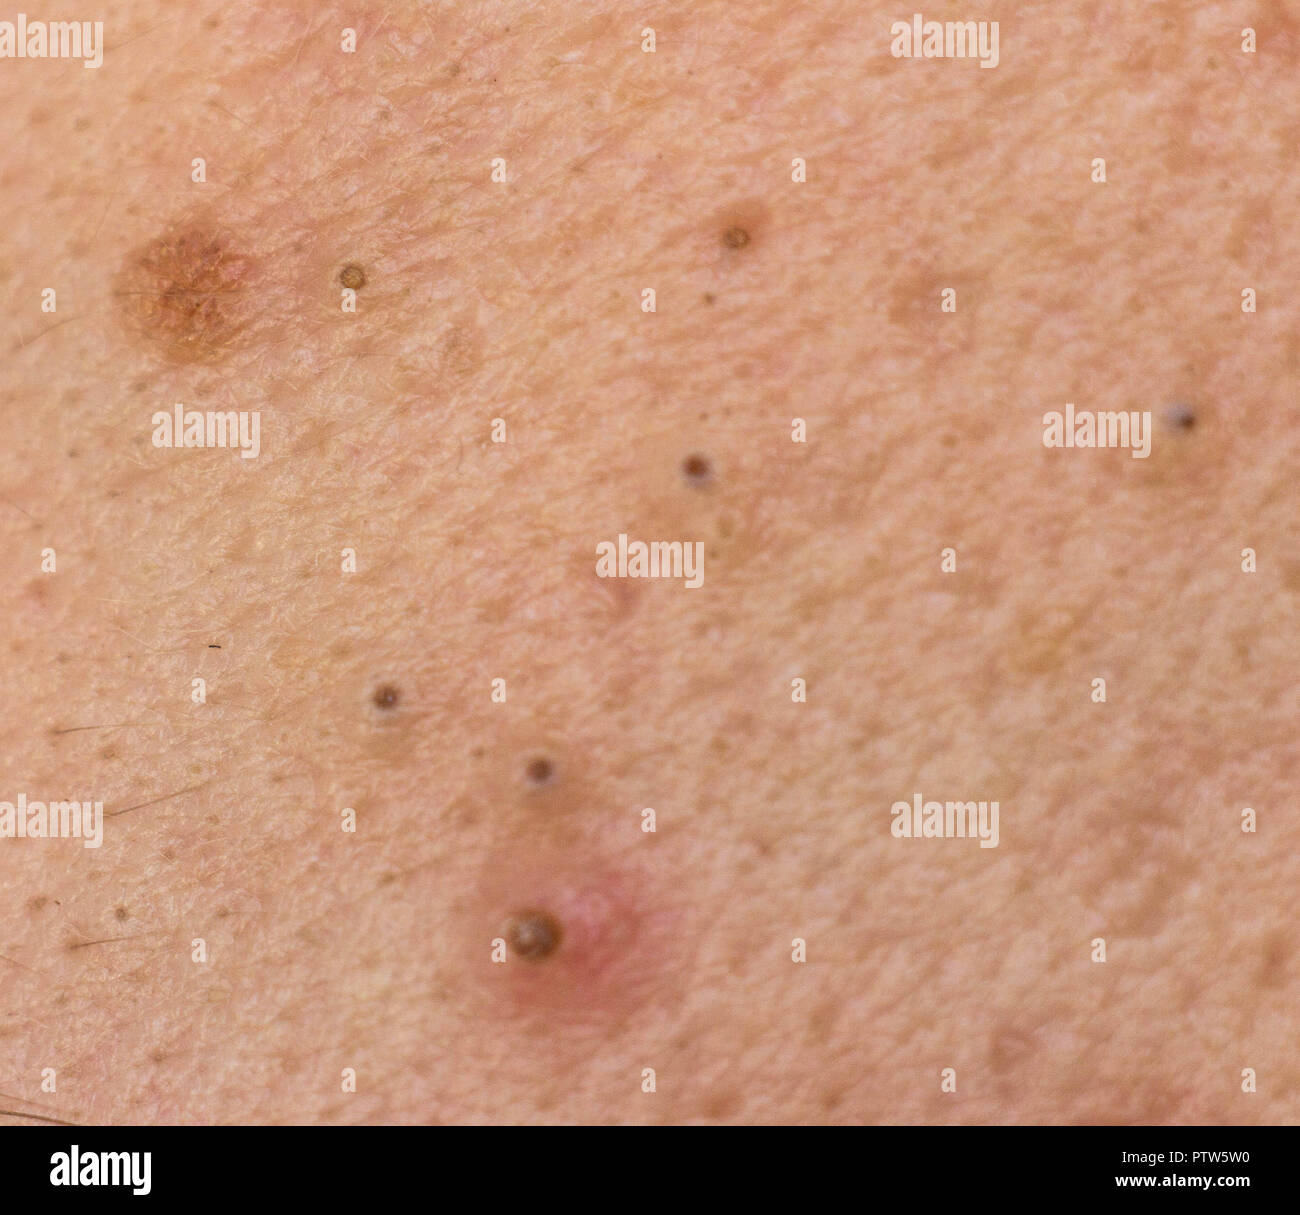 Black dots on face and pimples macro, comedo Stock Photo